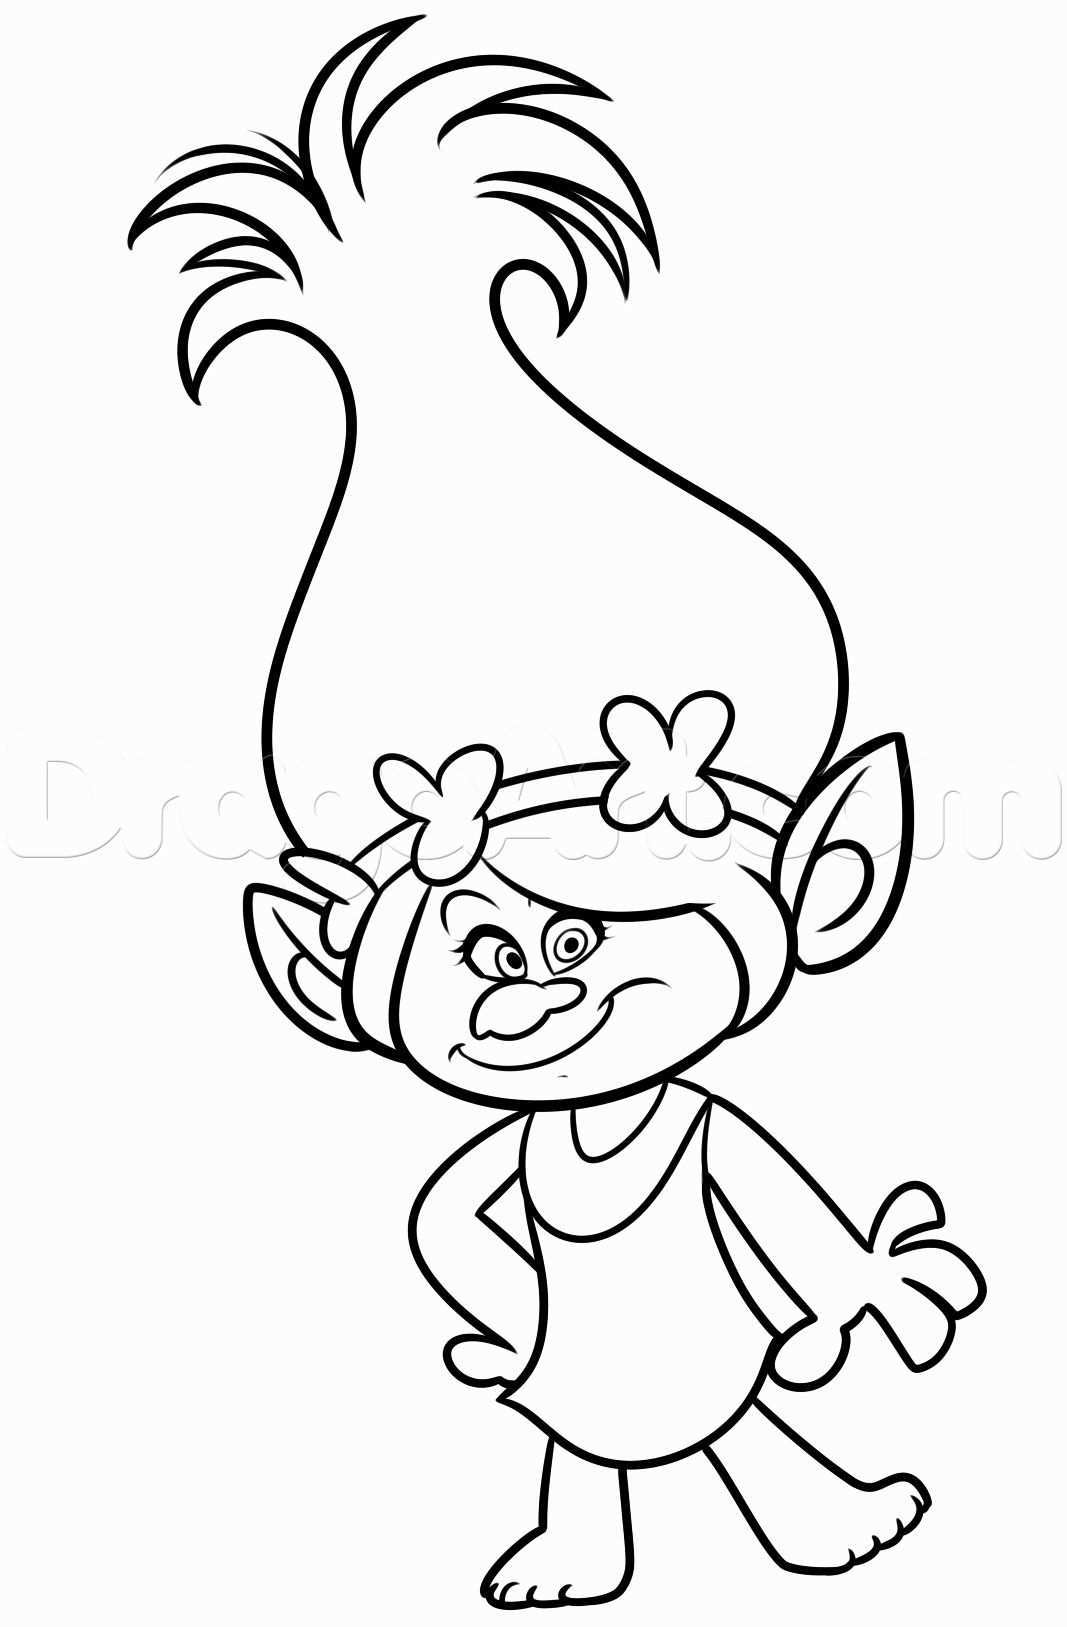 Pin On Coloring Page For Adult